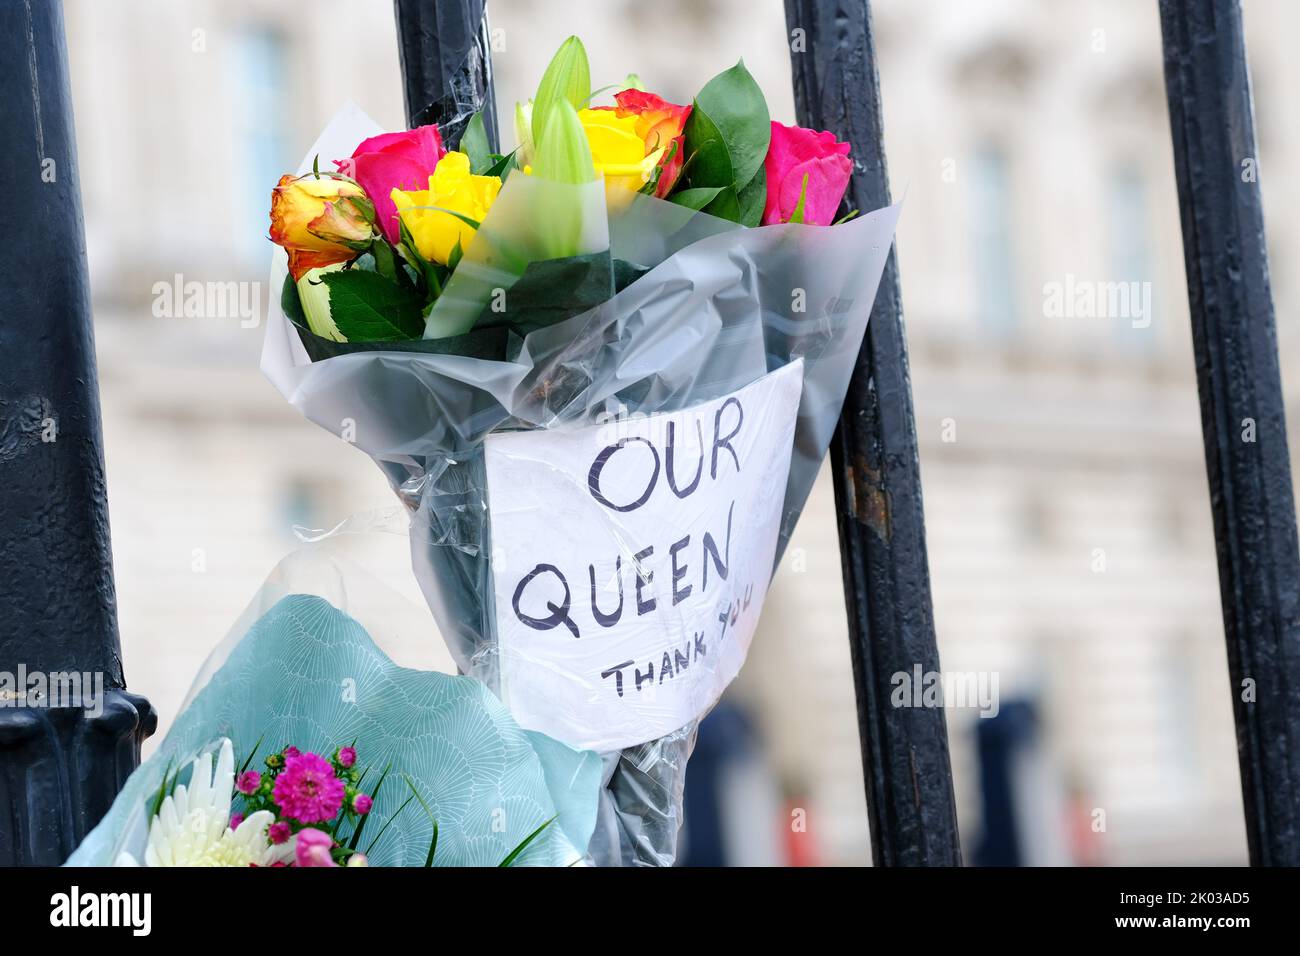 Buckingham Palace, London, UK – Friday 9th September 2022 – Our Queen - Thank You  - a message on flowers outside Buckingham Palace as Britain mourns the death of Queen Elizabeth II. Photo Steven May / Alamy Live News Stock Photo